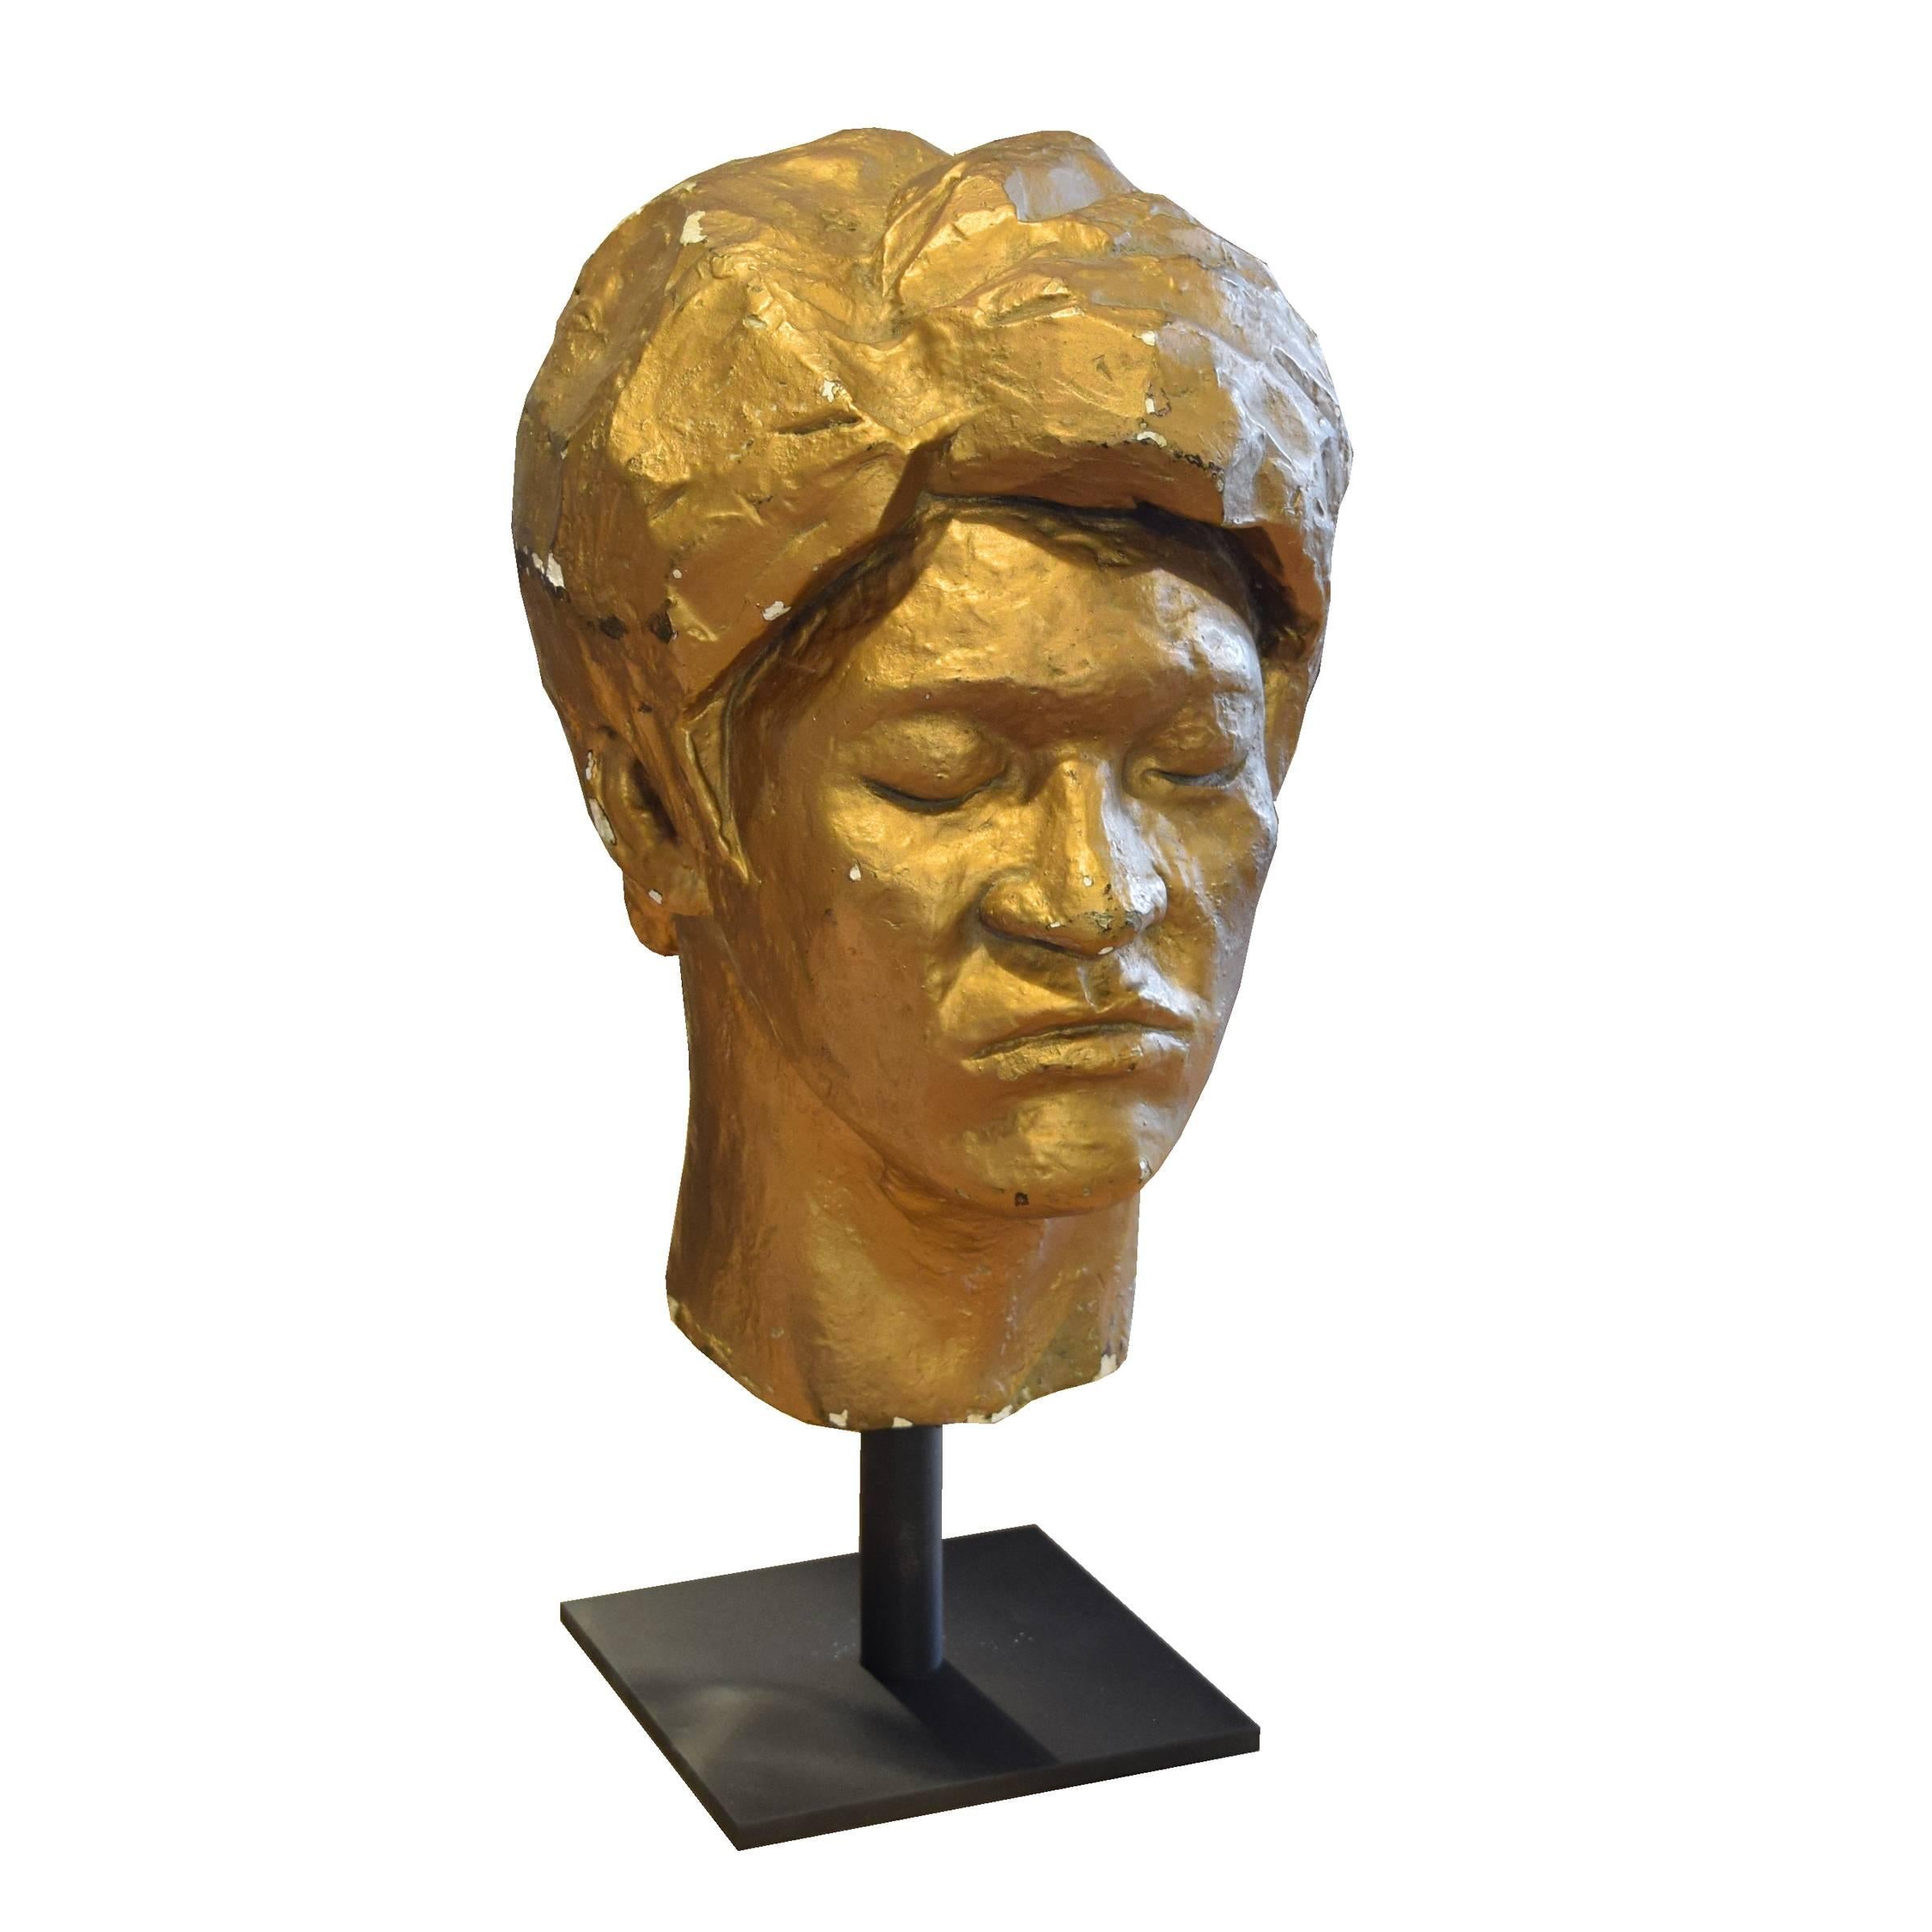 An artist composition bust with gold paint, circa 1960, on a custom mount.